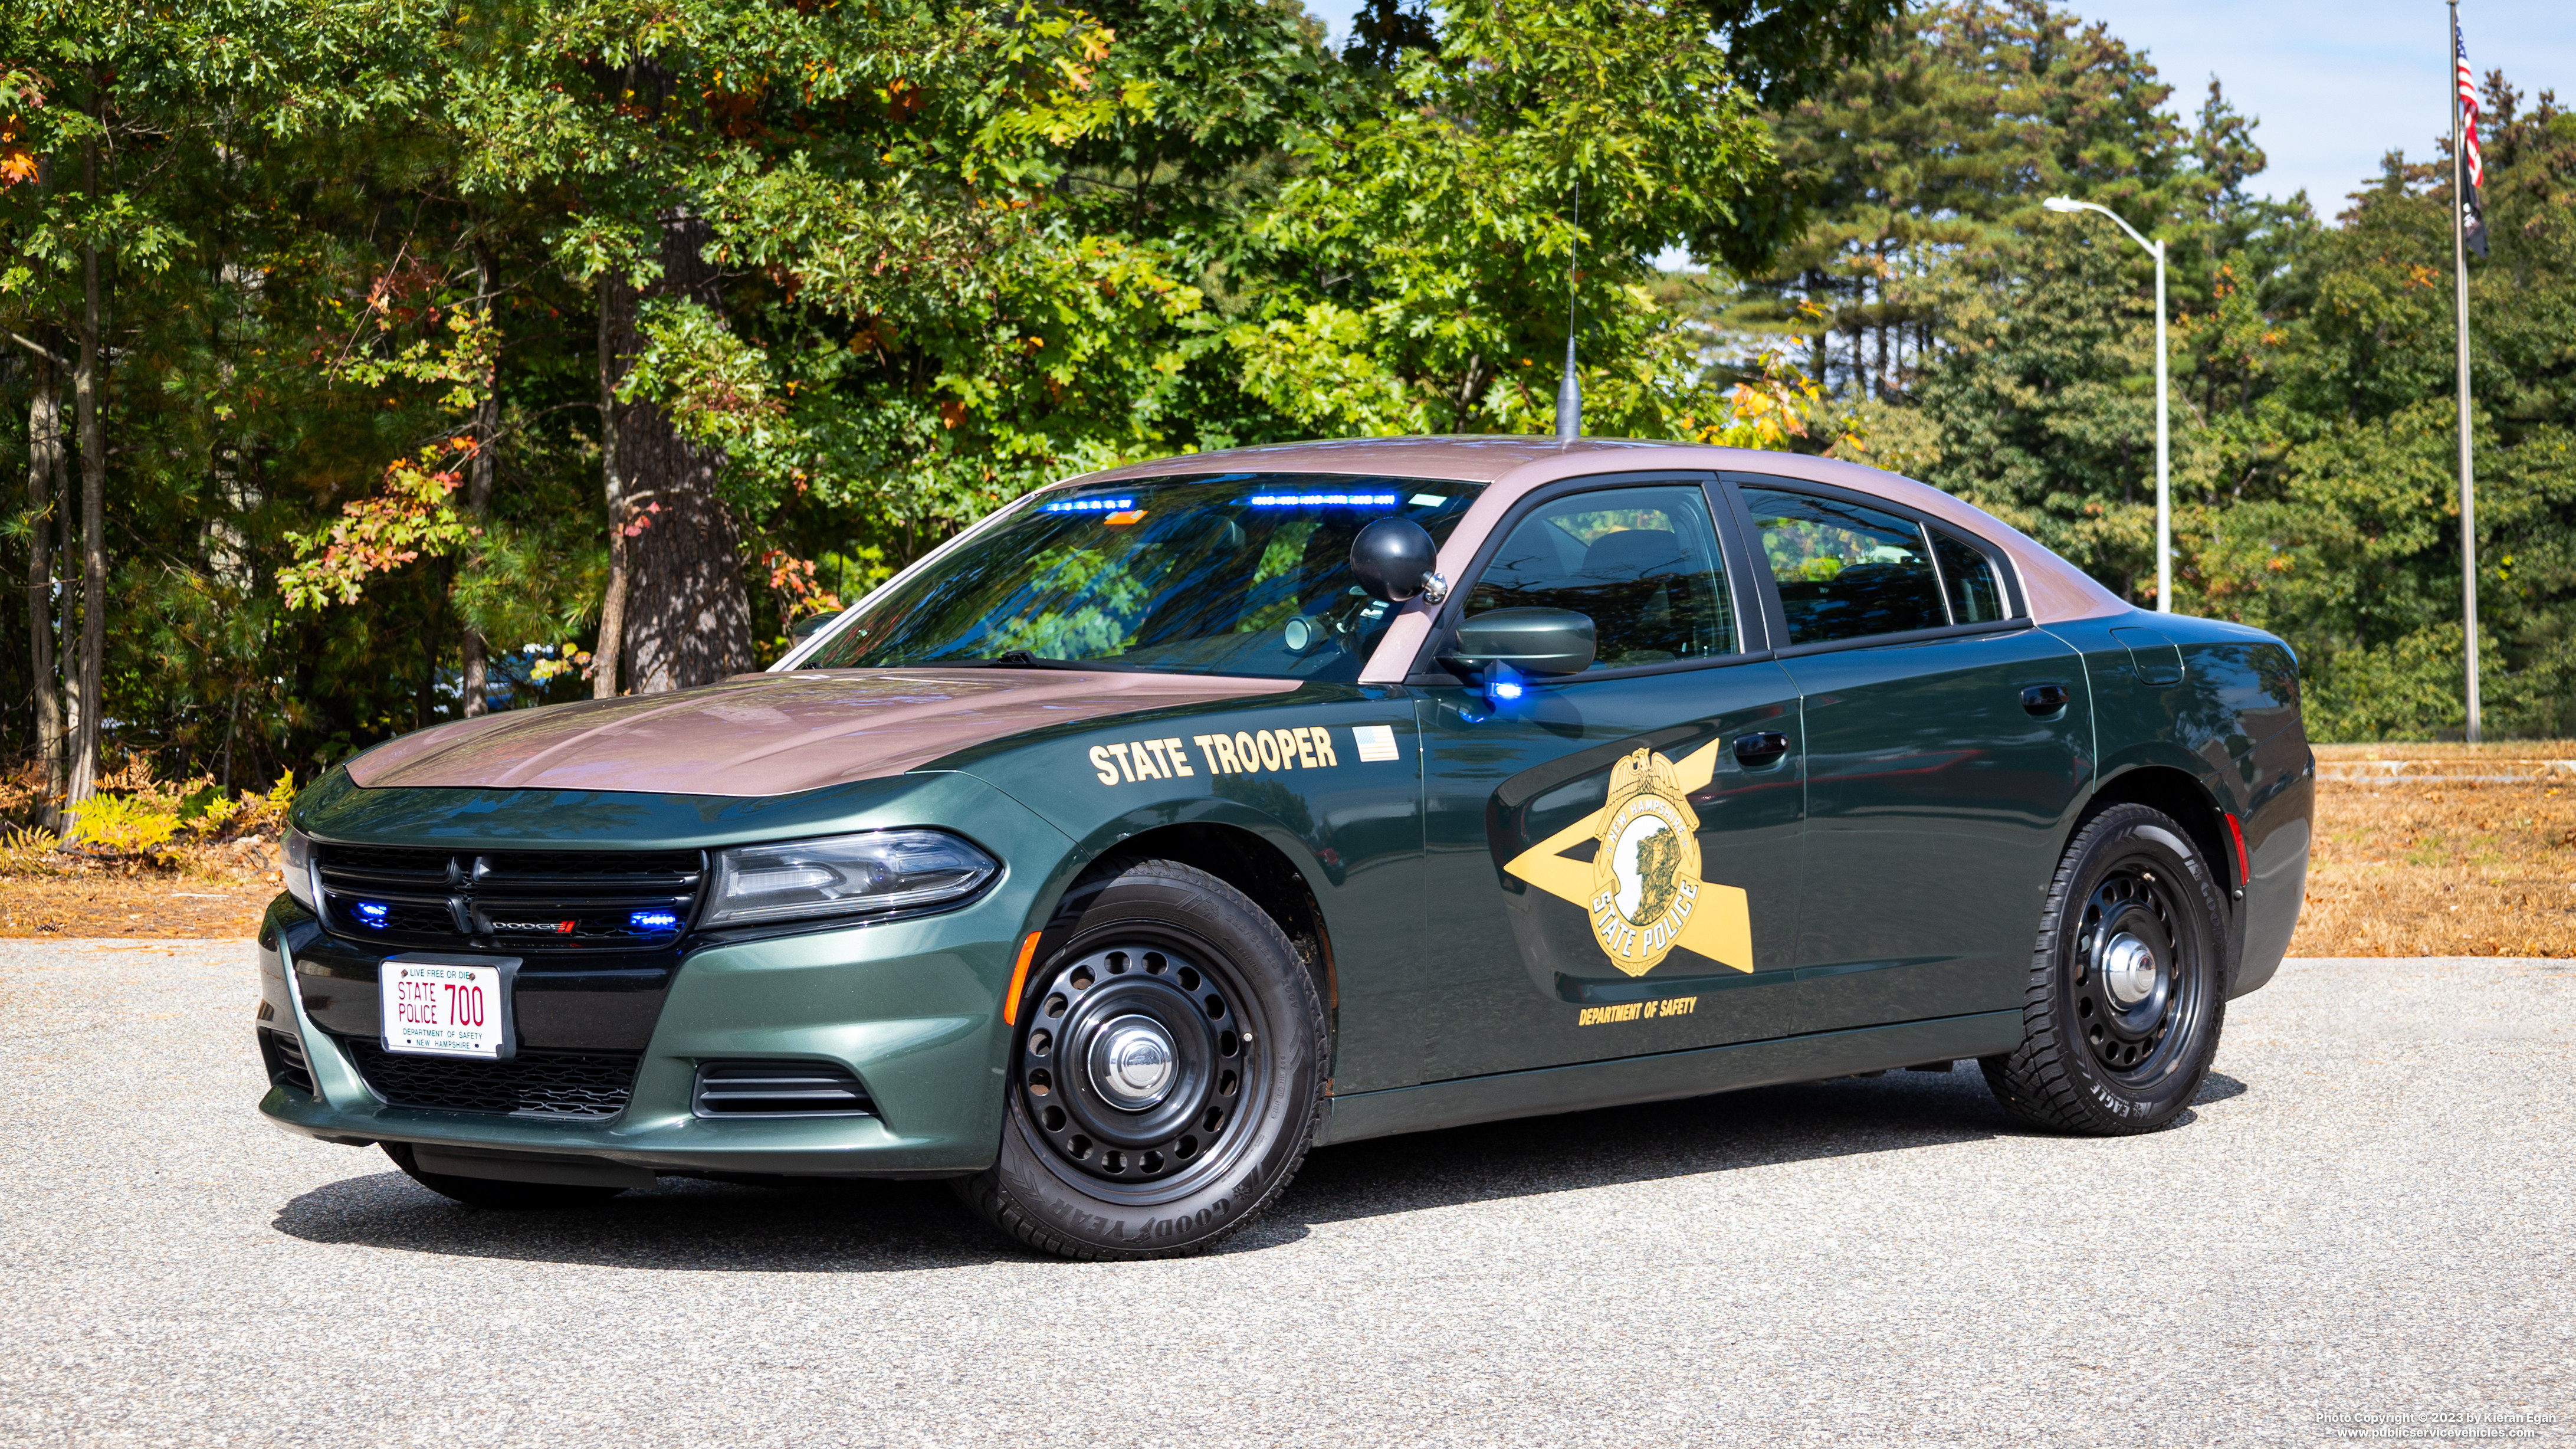 A photo  of New Hampshire State Police
            Cruiser 700, a 2017 Dodge Charger             taken by Kieran Egan